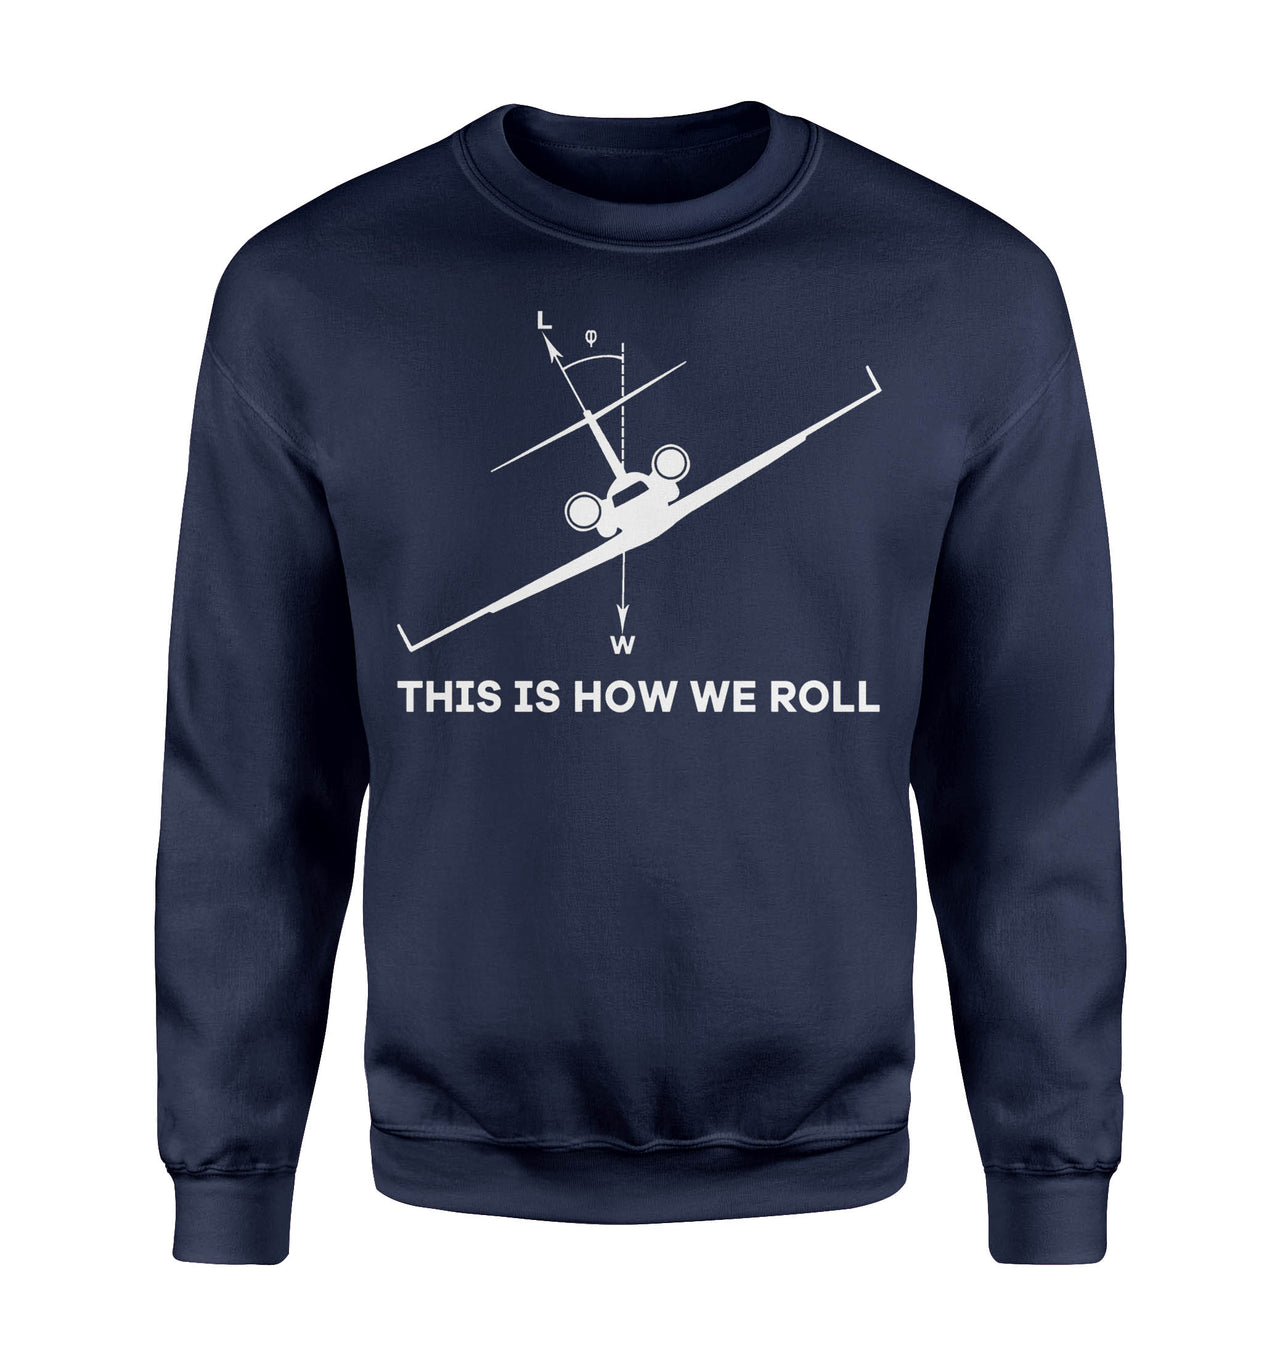 This is How We Roll Designed Sweatshirts